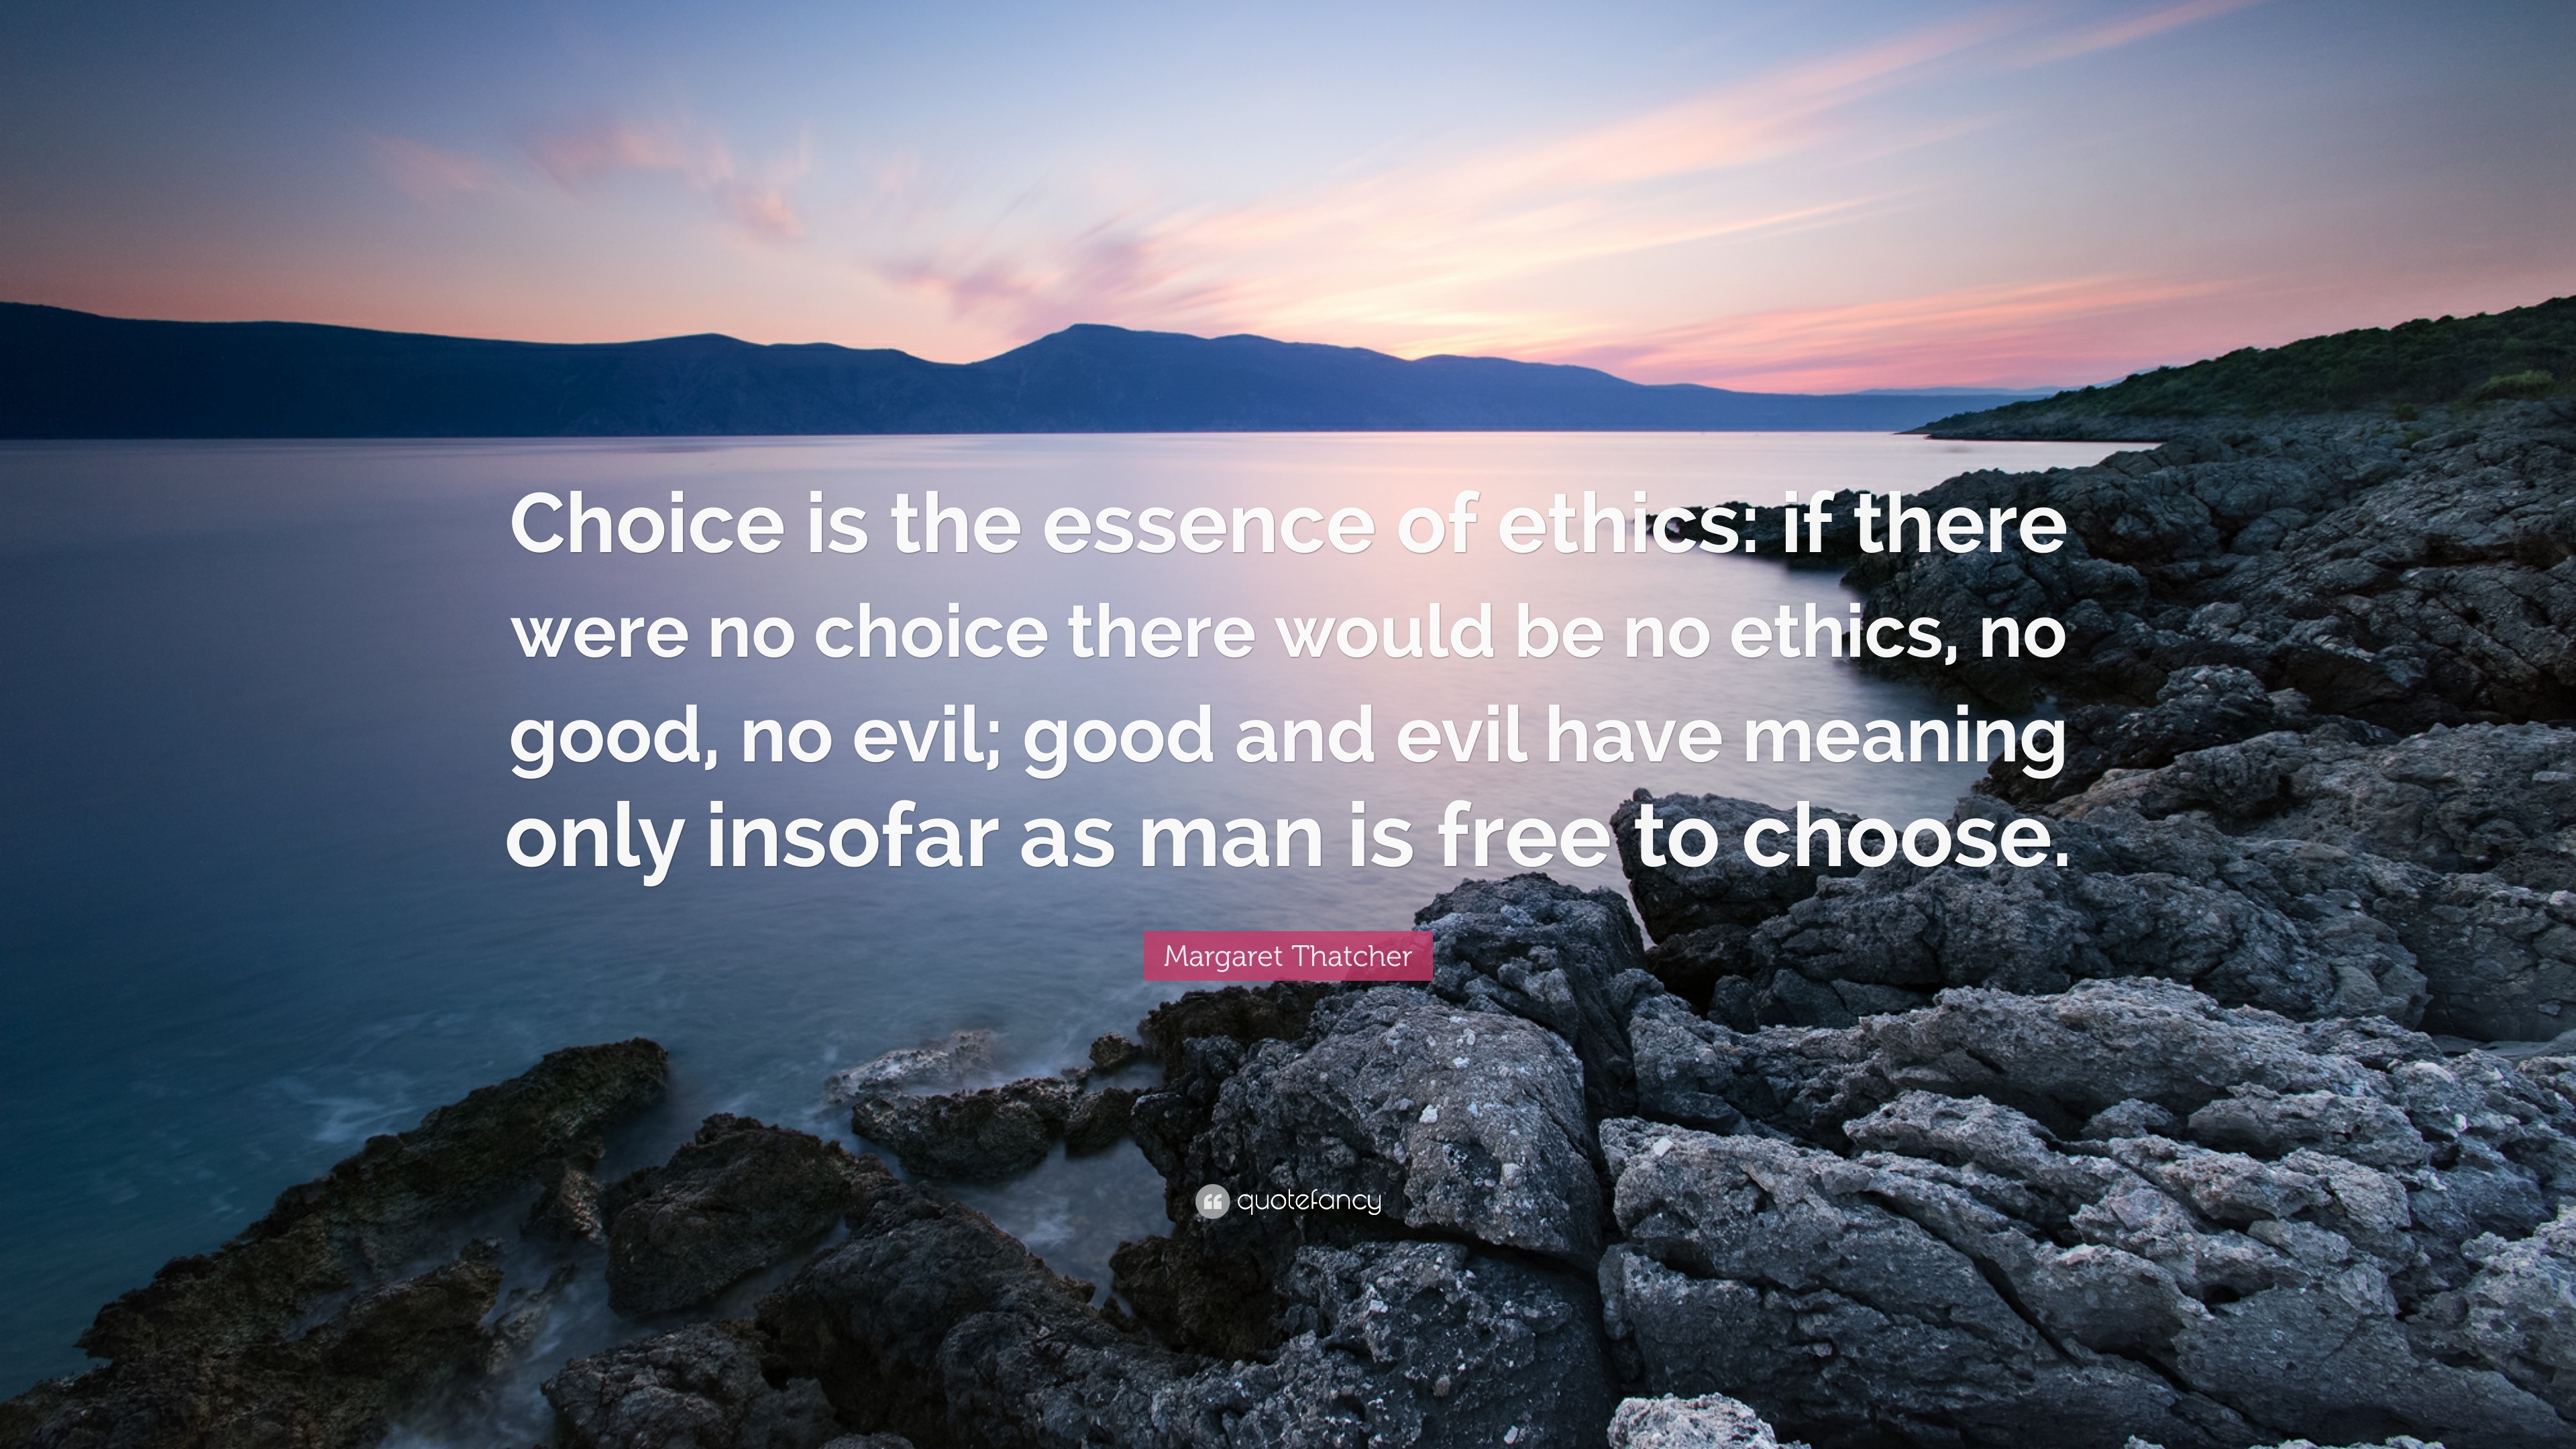 Margaret Thatcher Quote: “Choice is the essence of ethics: if there